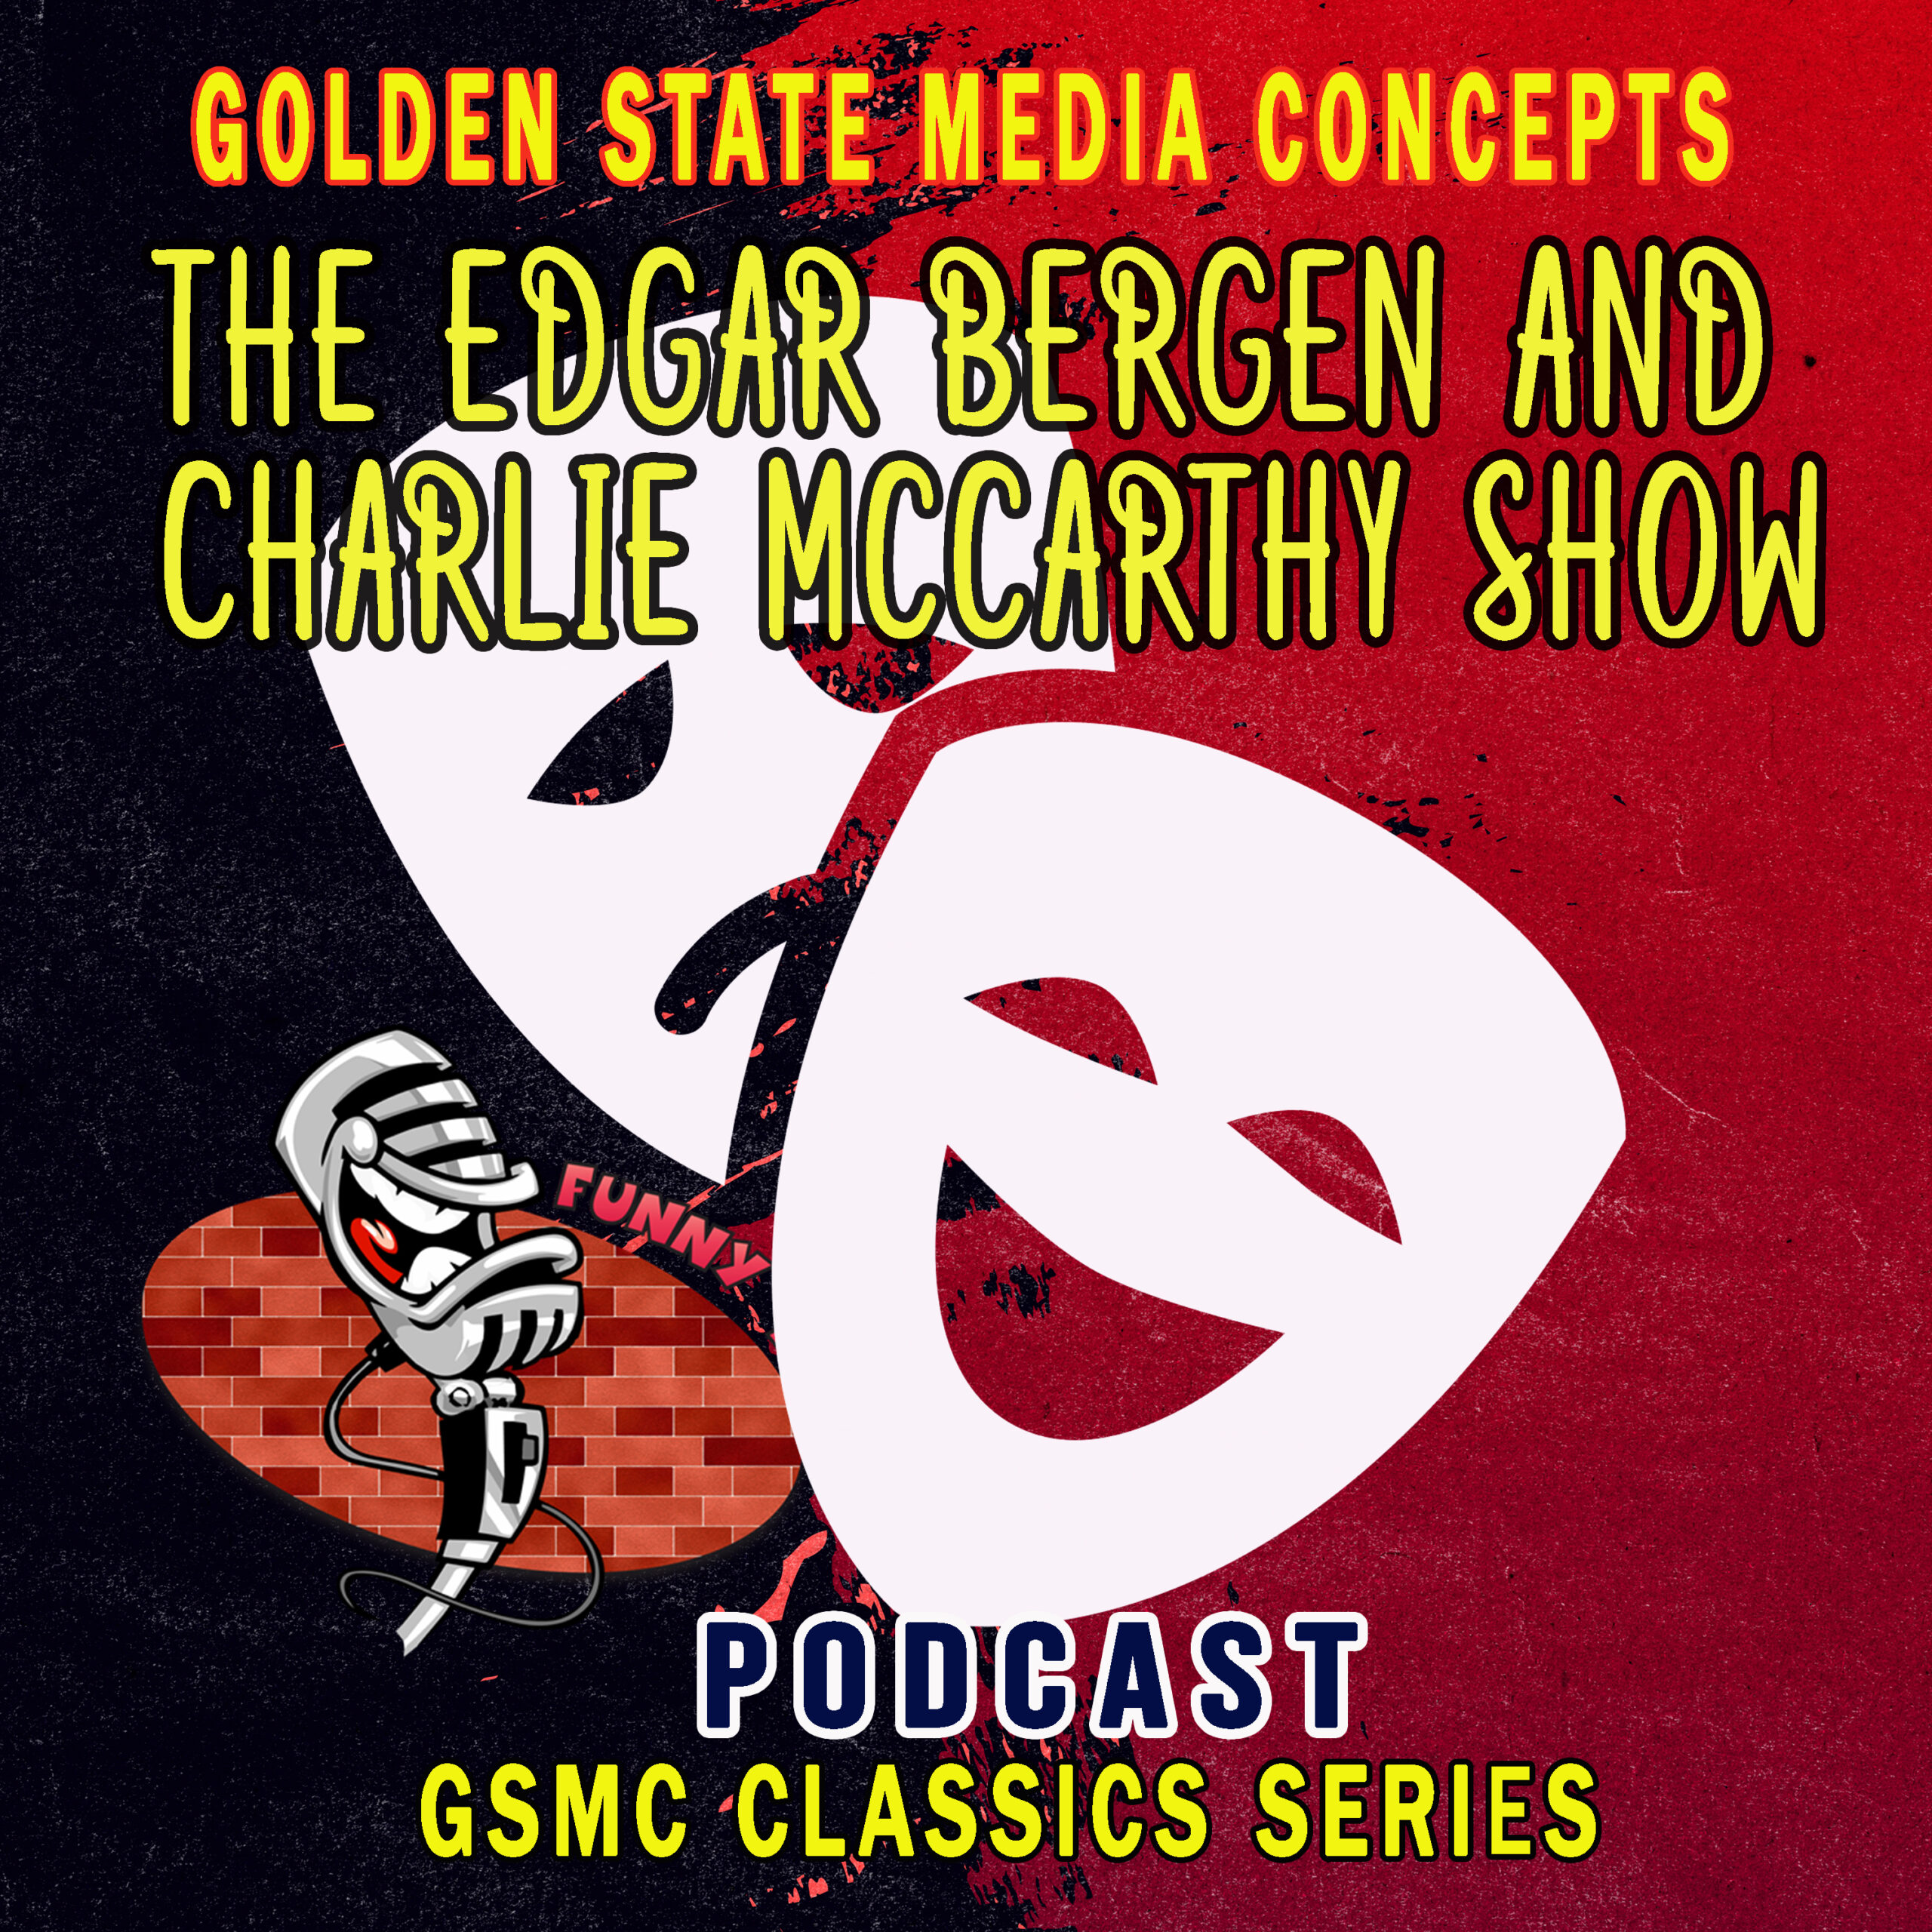 The Edgar Bergen and Charlie McCarthy Show